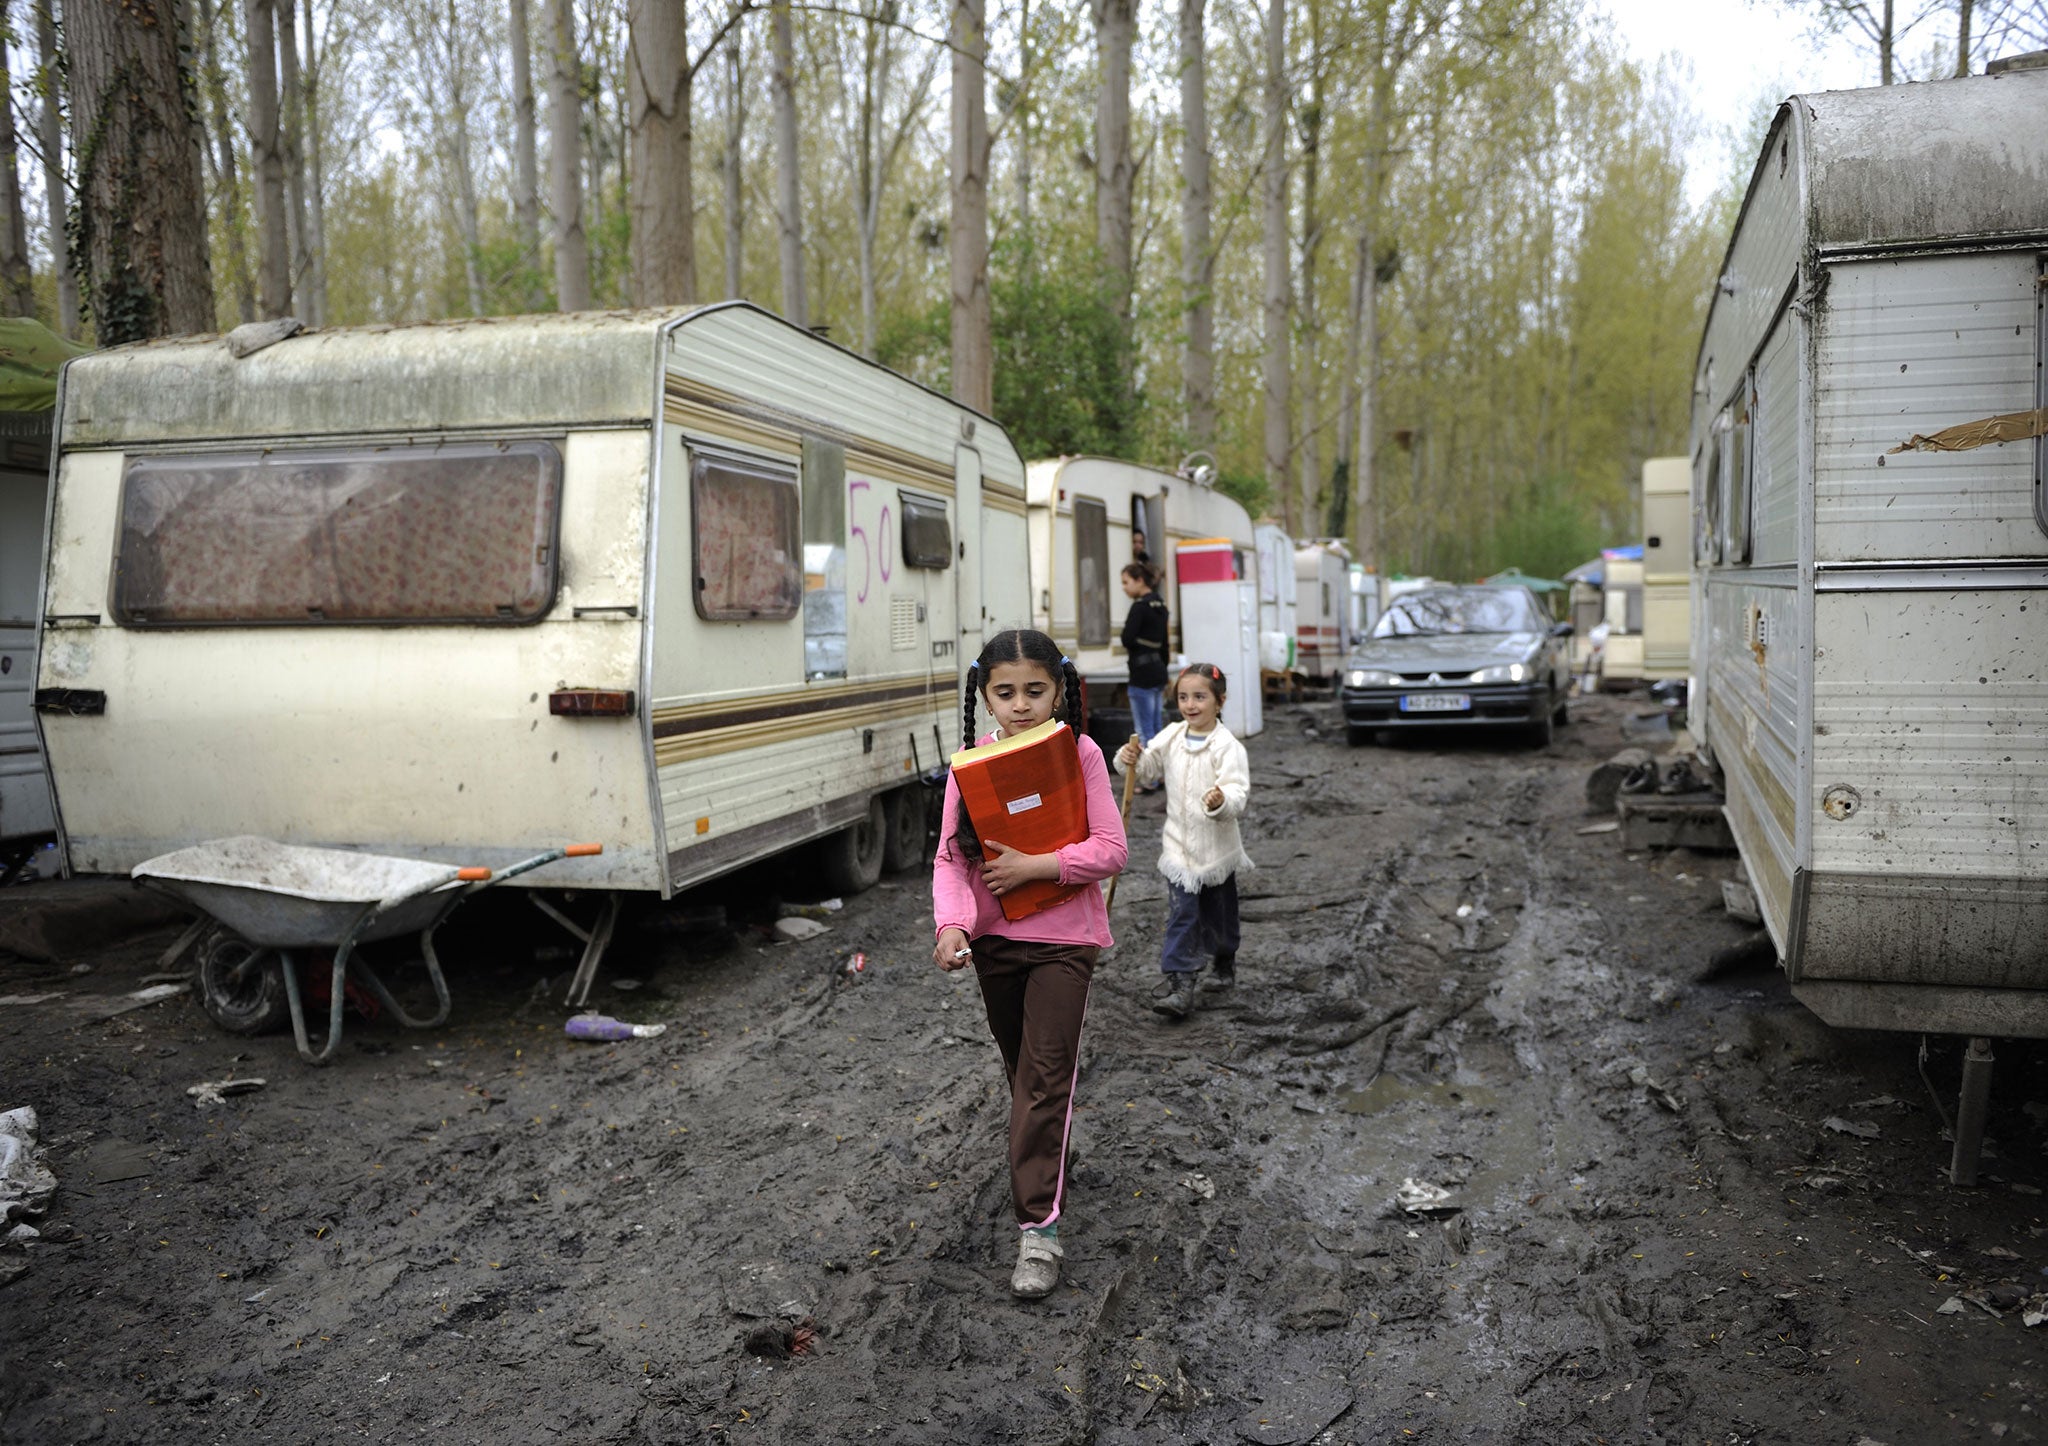 Roma children in France face frequent evictions from their homes